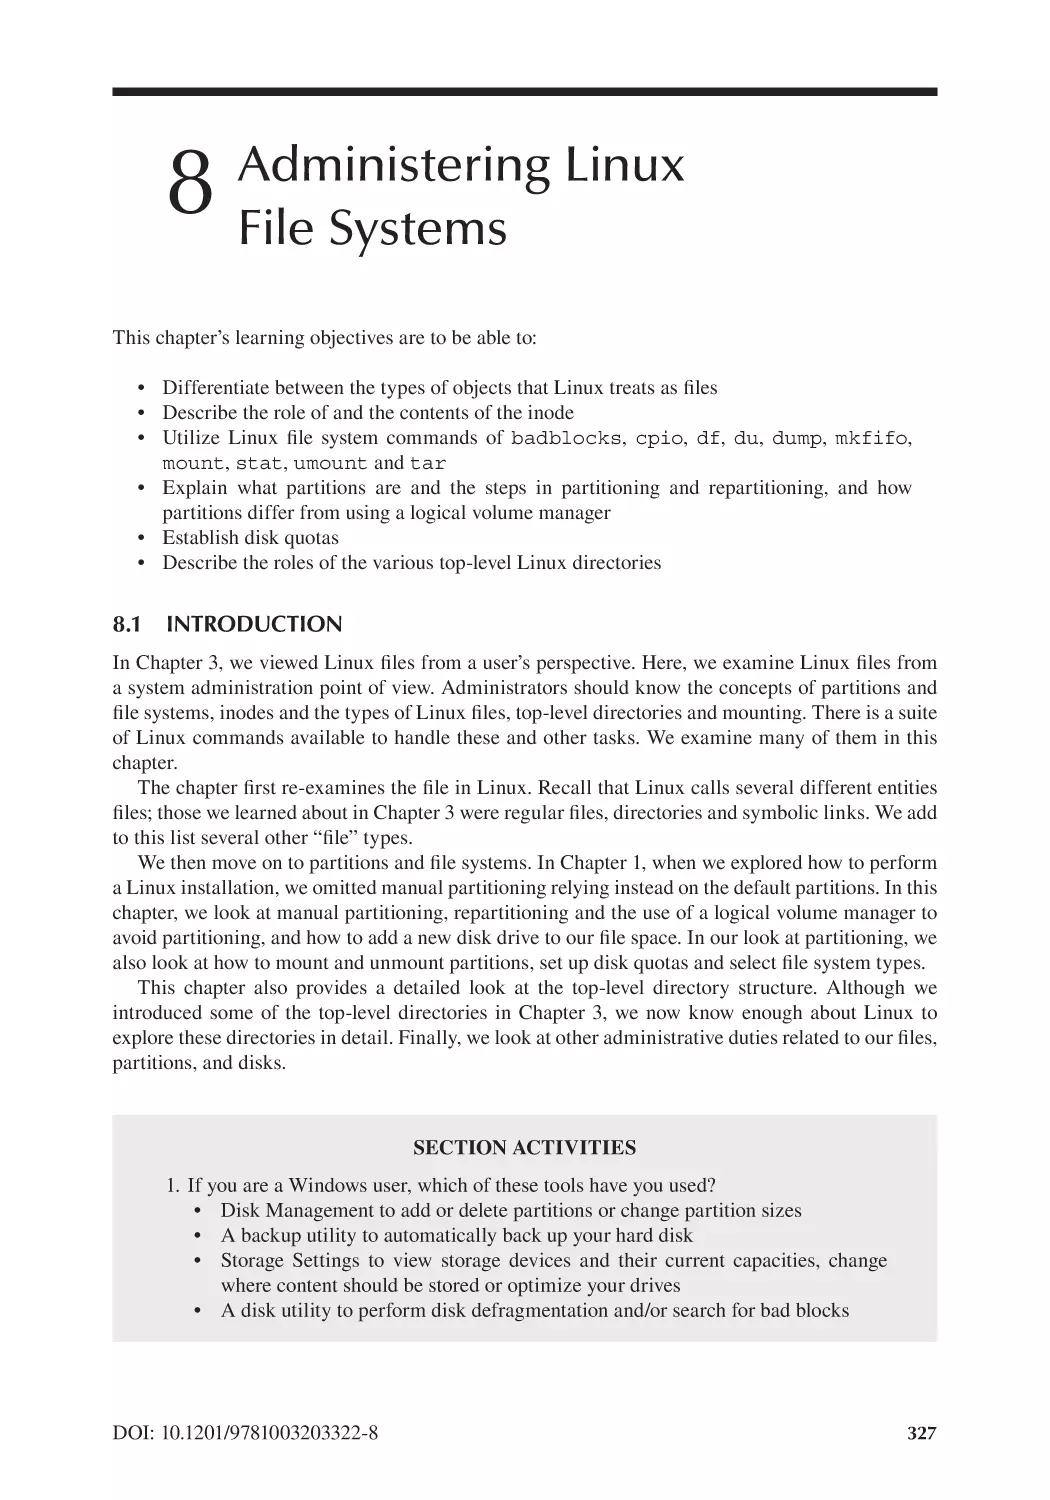 Chapter 8 Administering Linux File Systems
8.1 Introduction